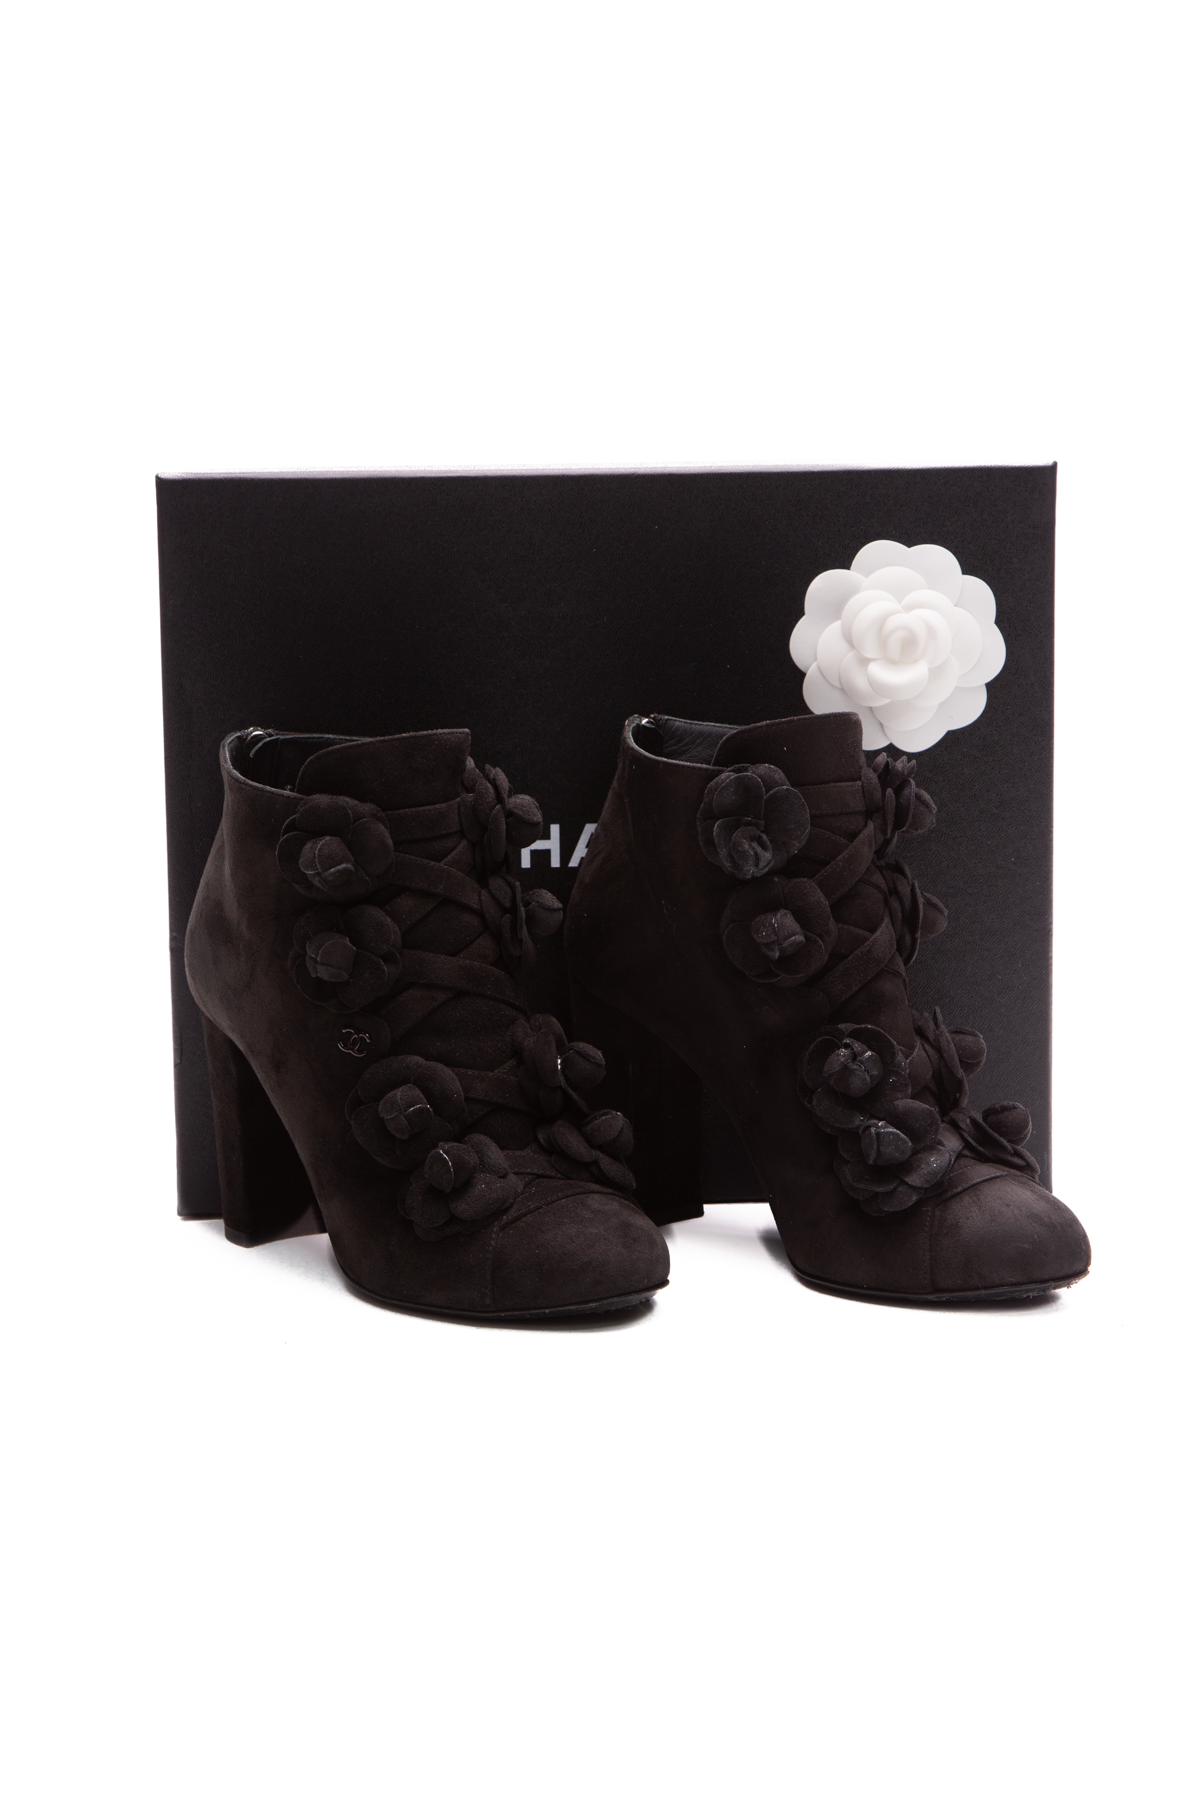 Chanel Camellia Short Boots - Size 37